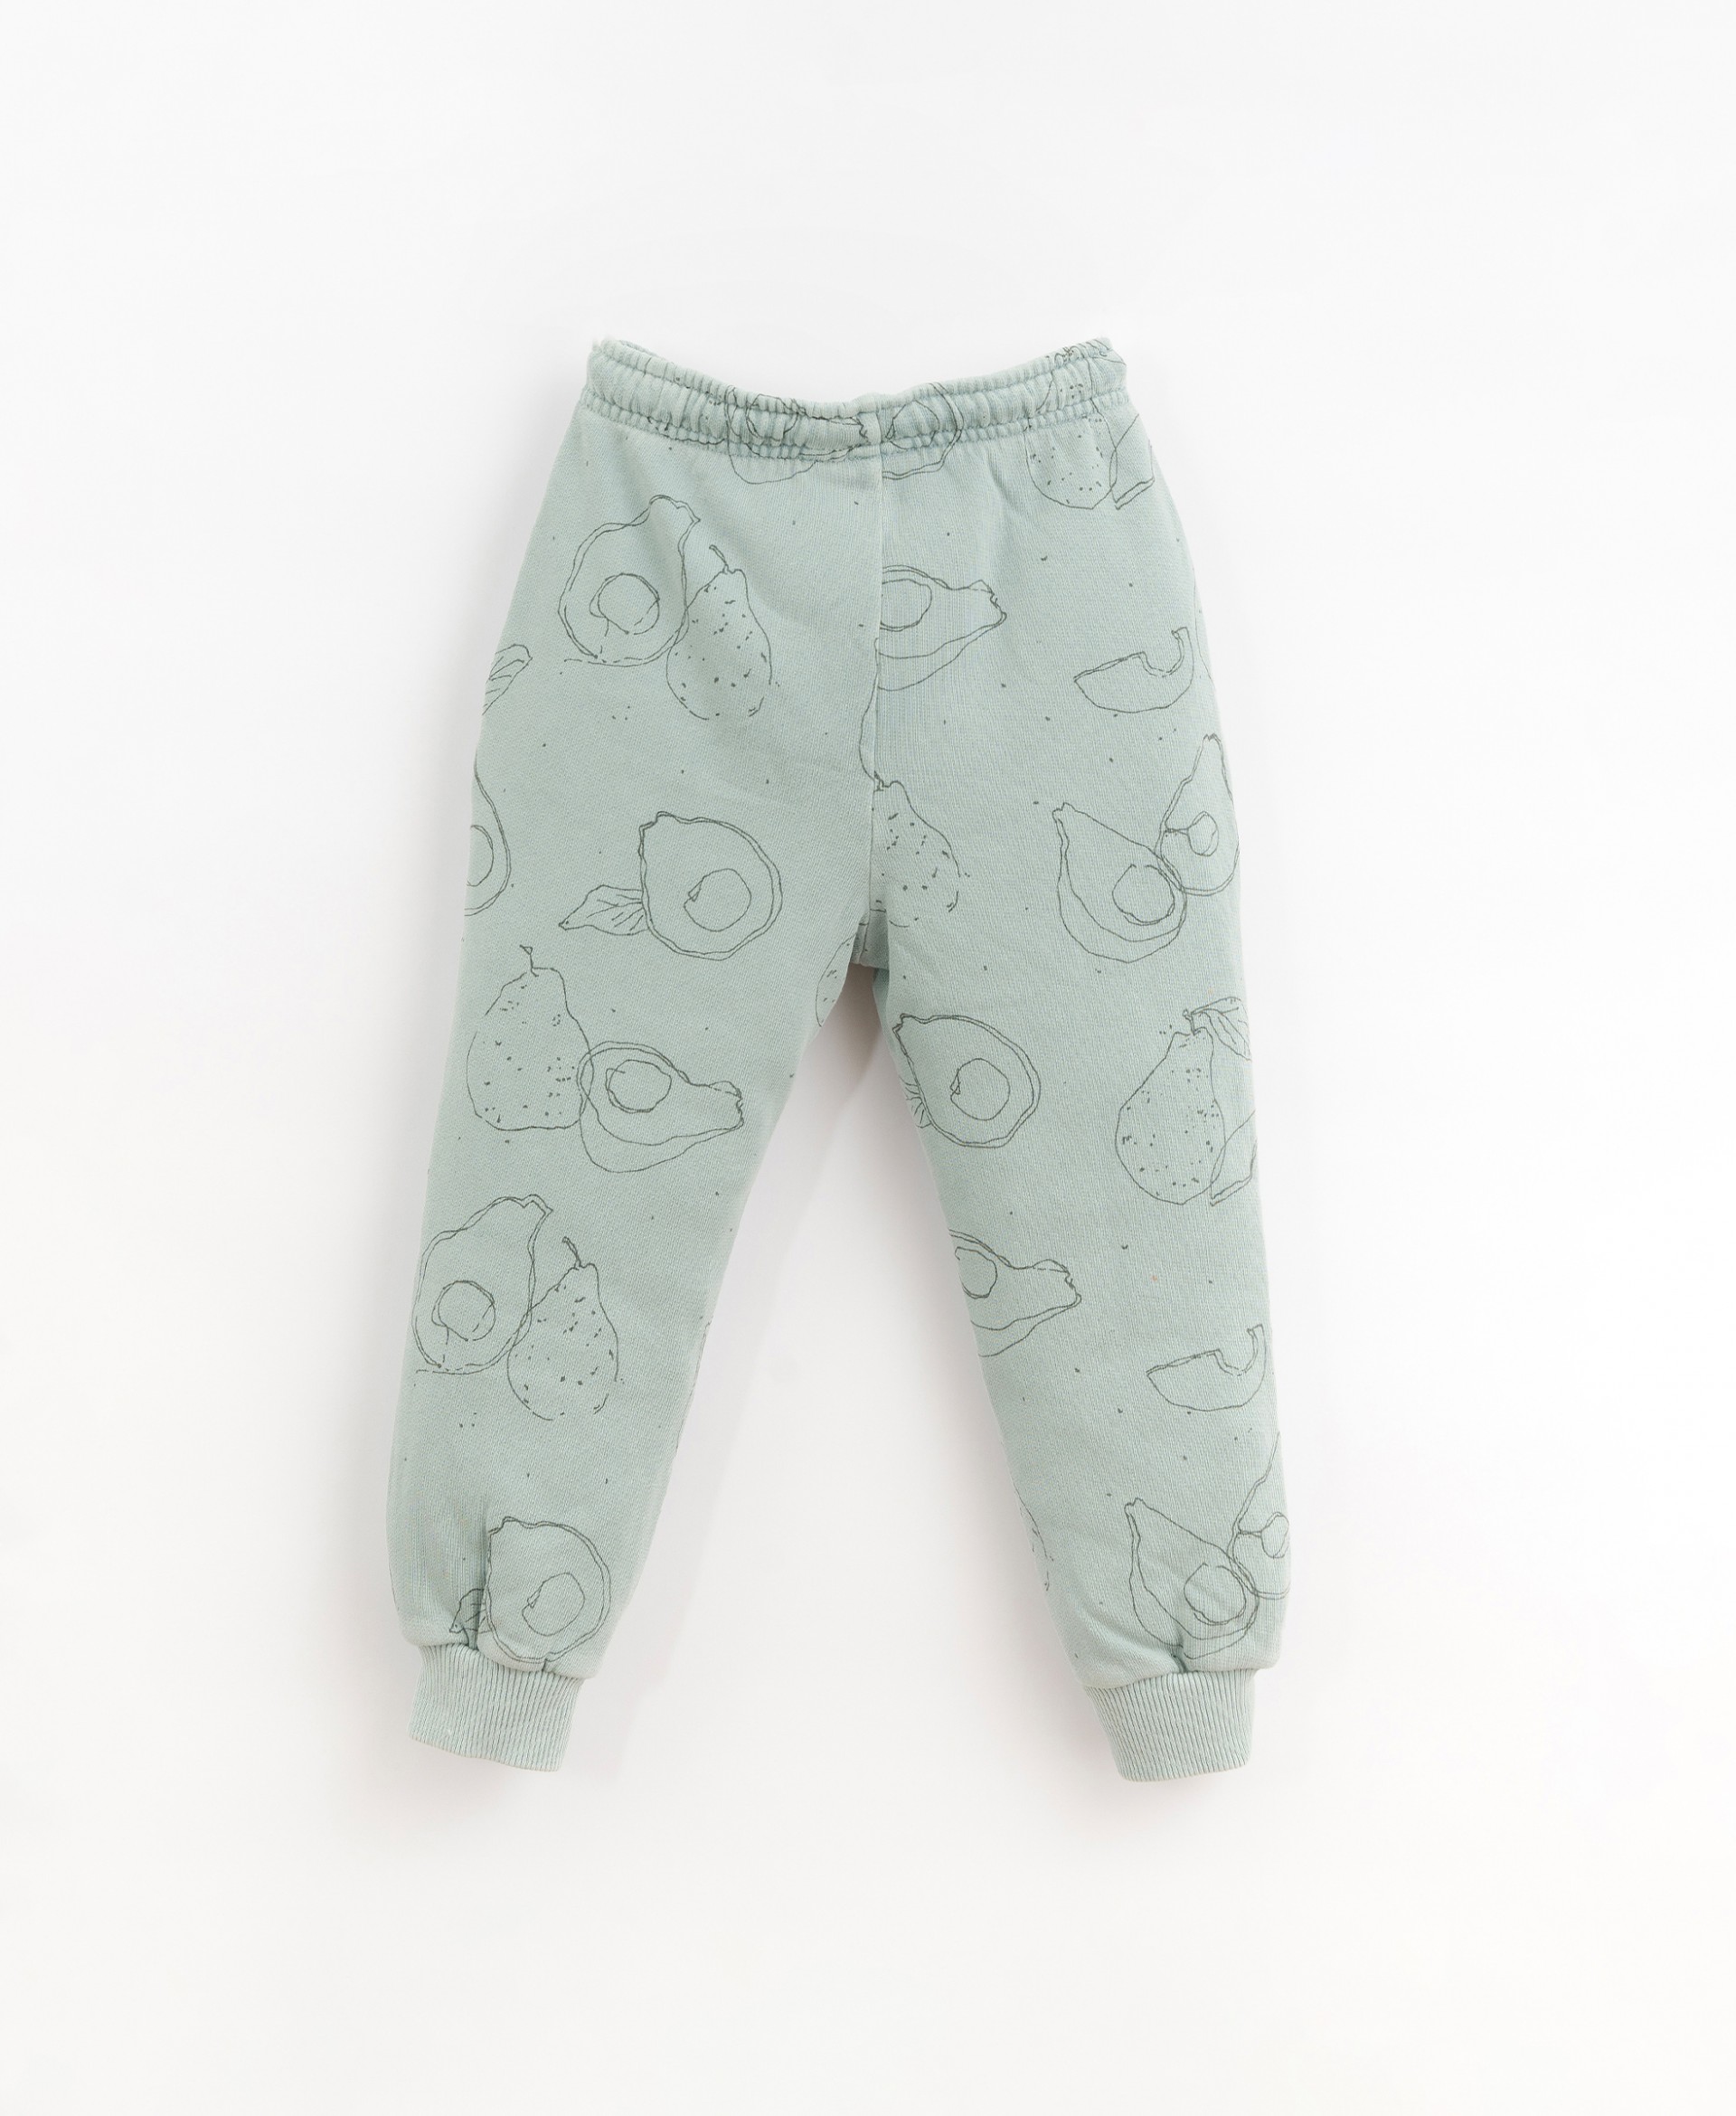 Trousers with avocado illustration | Organic Care